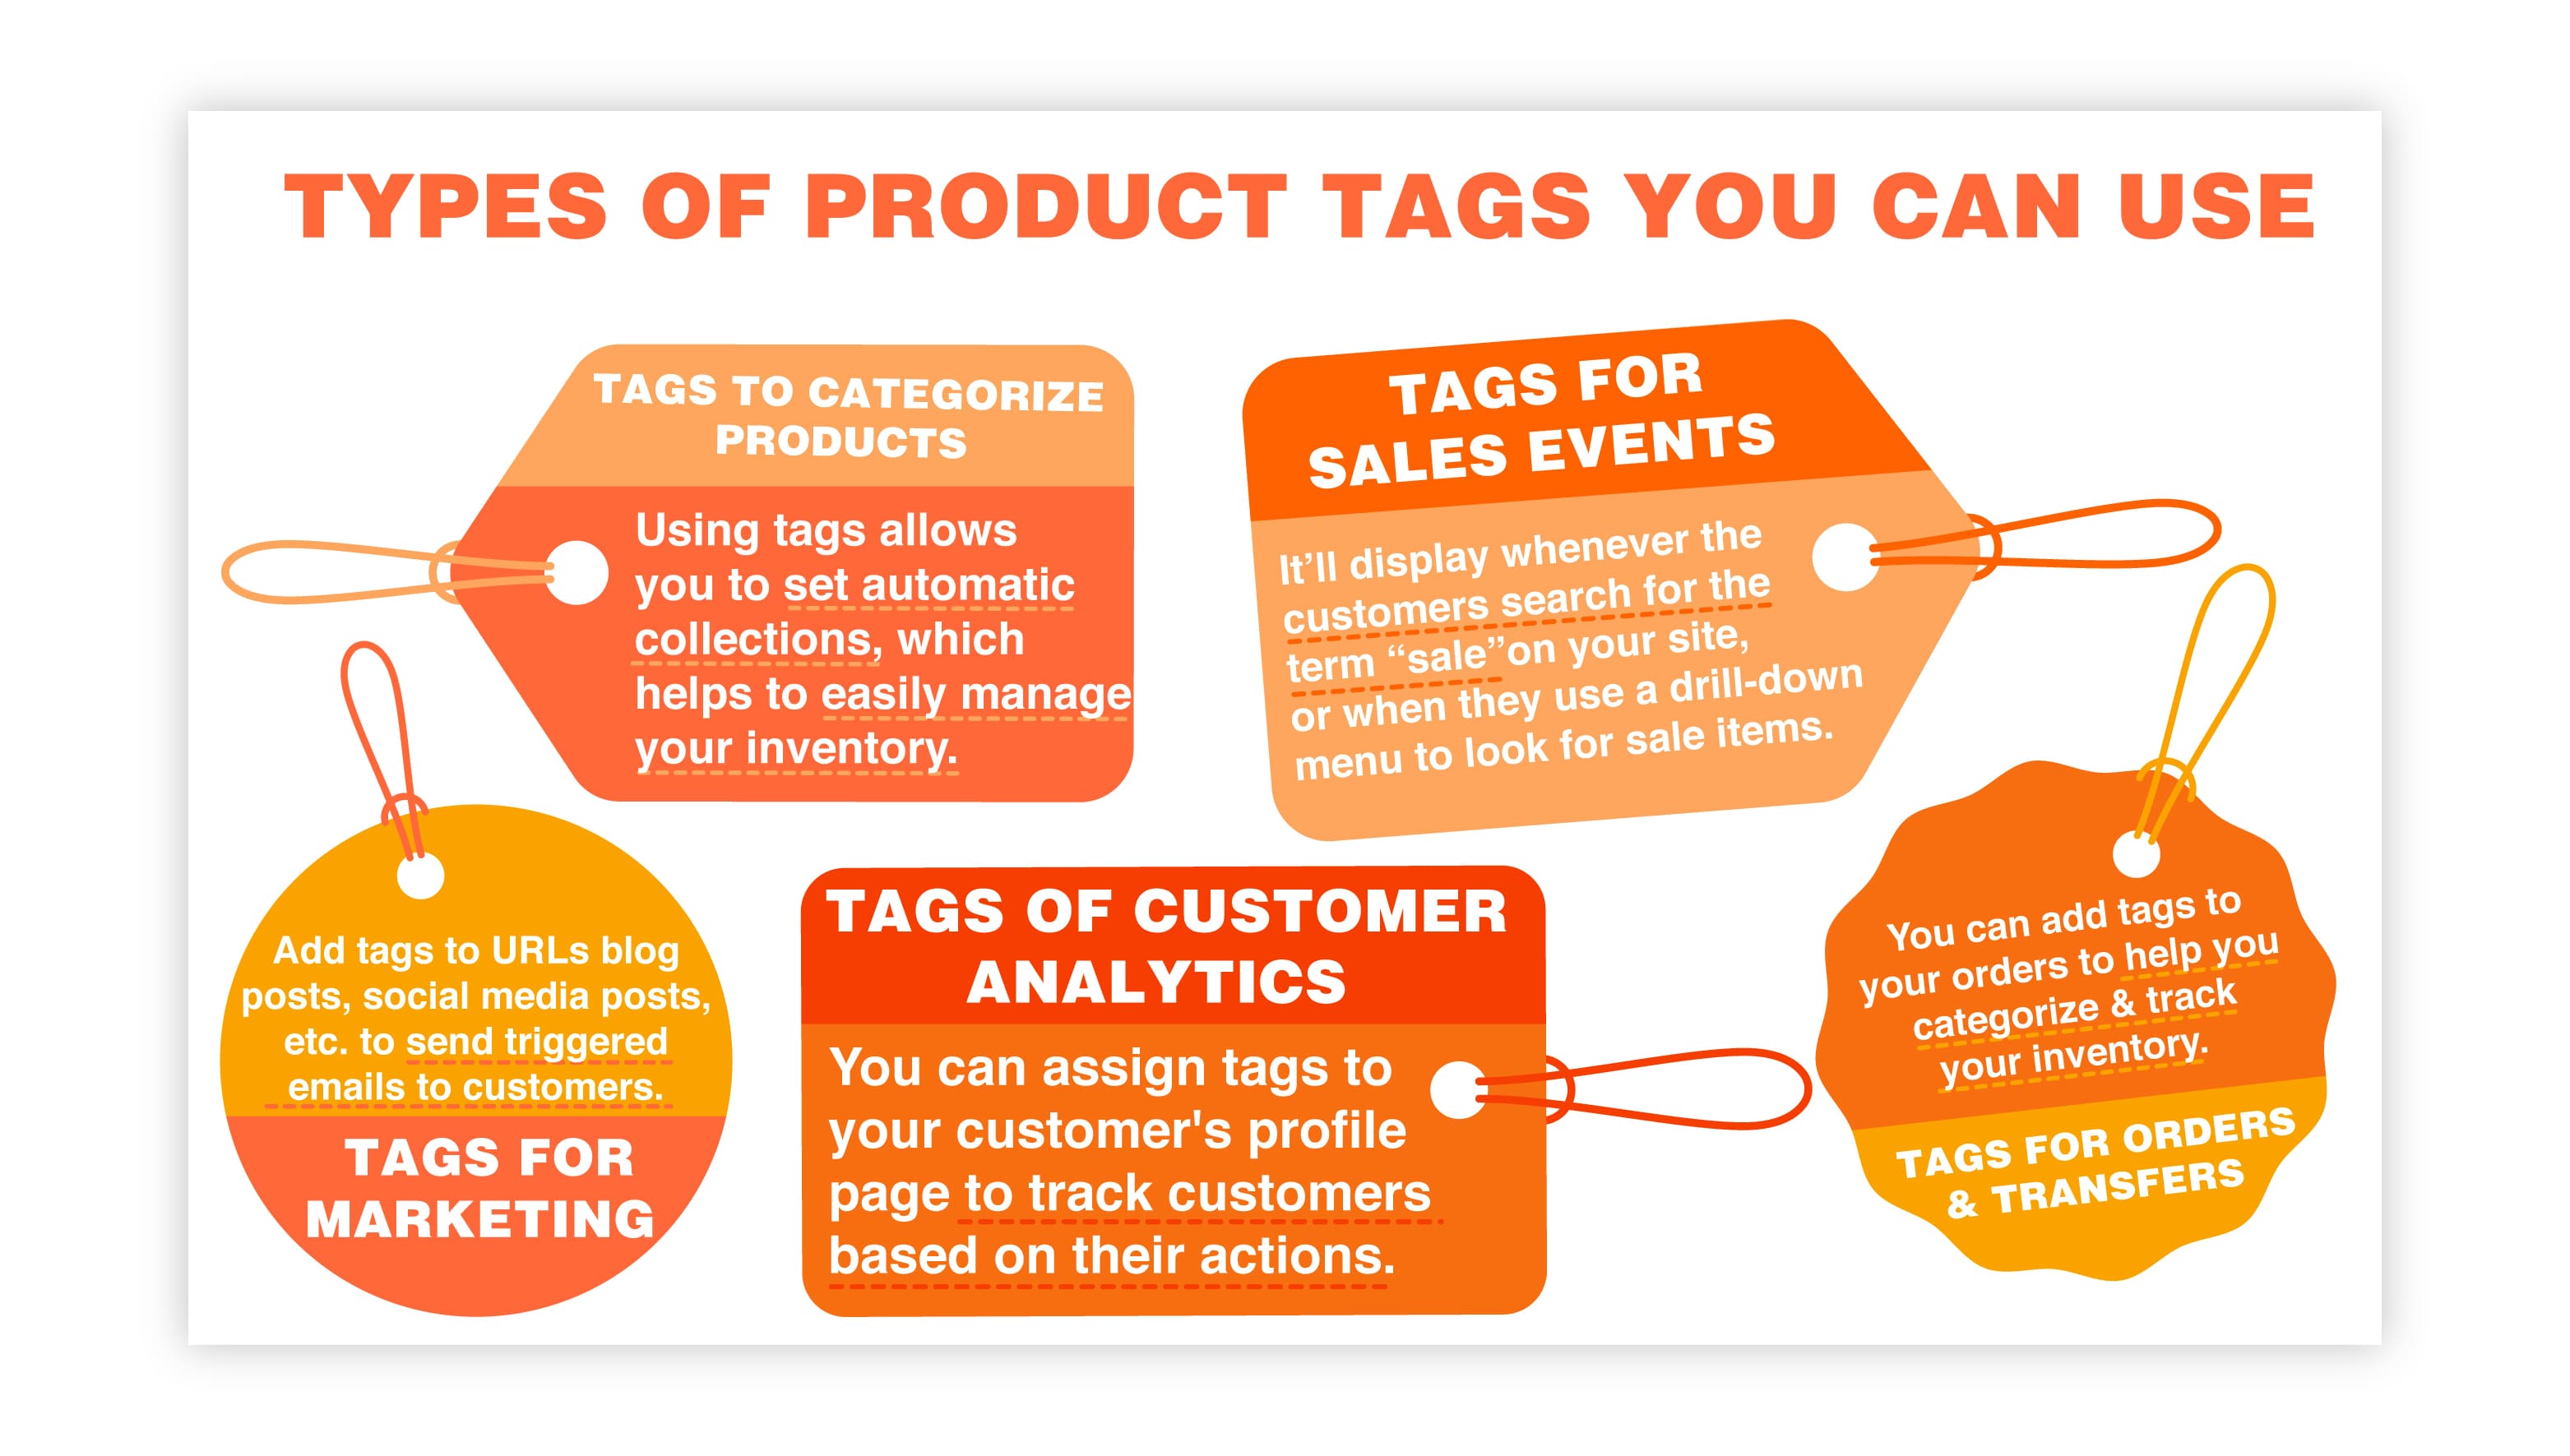 7 - types of product tags you can use